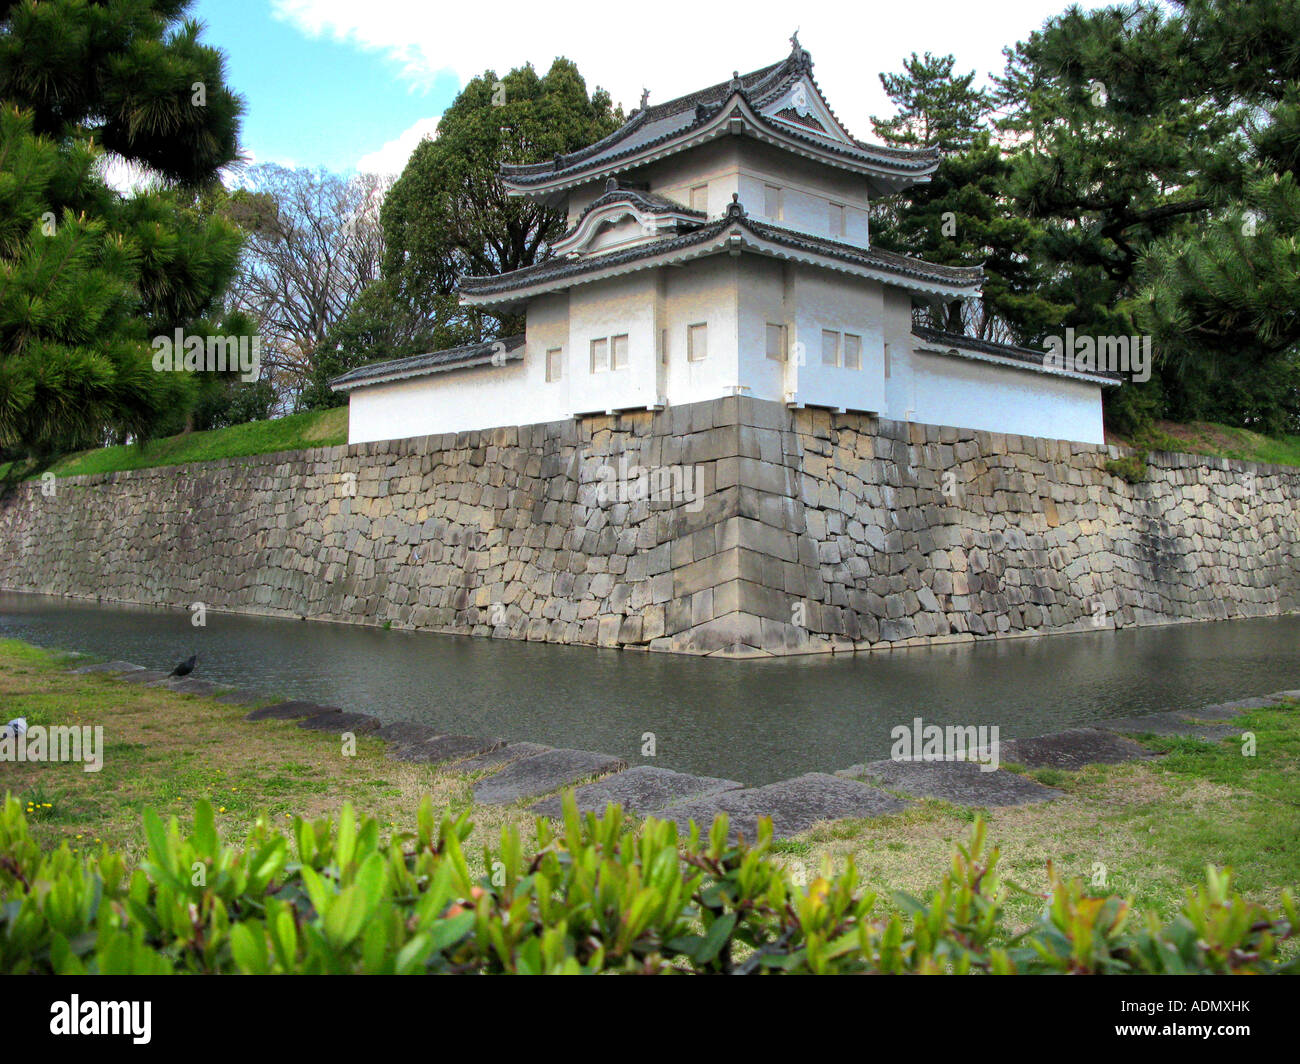 Nijō Castle  in Kyoto, Japan. Castle consists of two concentric rings of fortifications, Ninomaru Palace, the ruins of the Honmaru Palace, Stock Photo